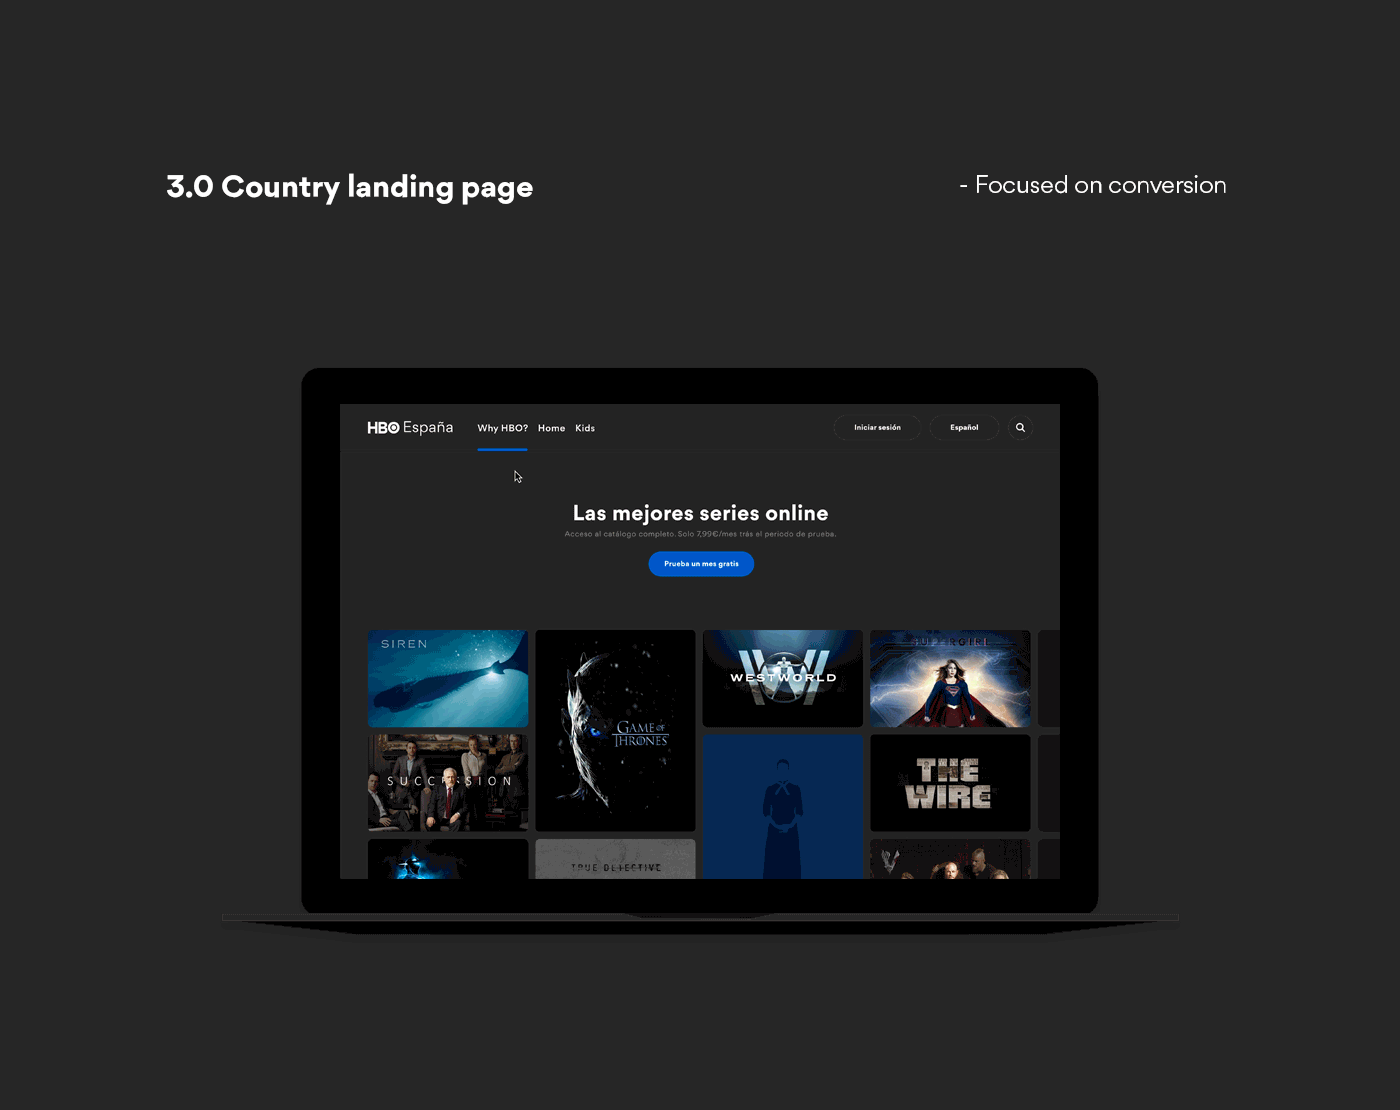 hbo concept brand interaction redesign tv app Rebrand Web RESTYLING